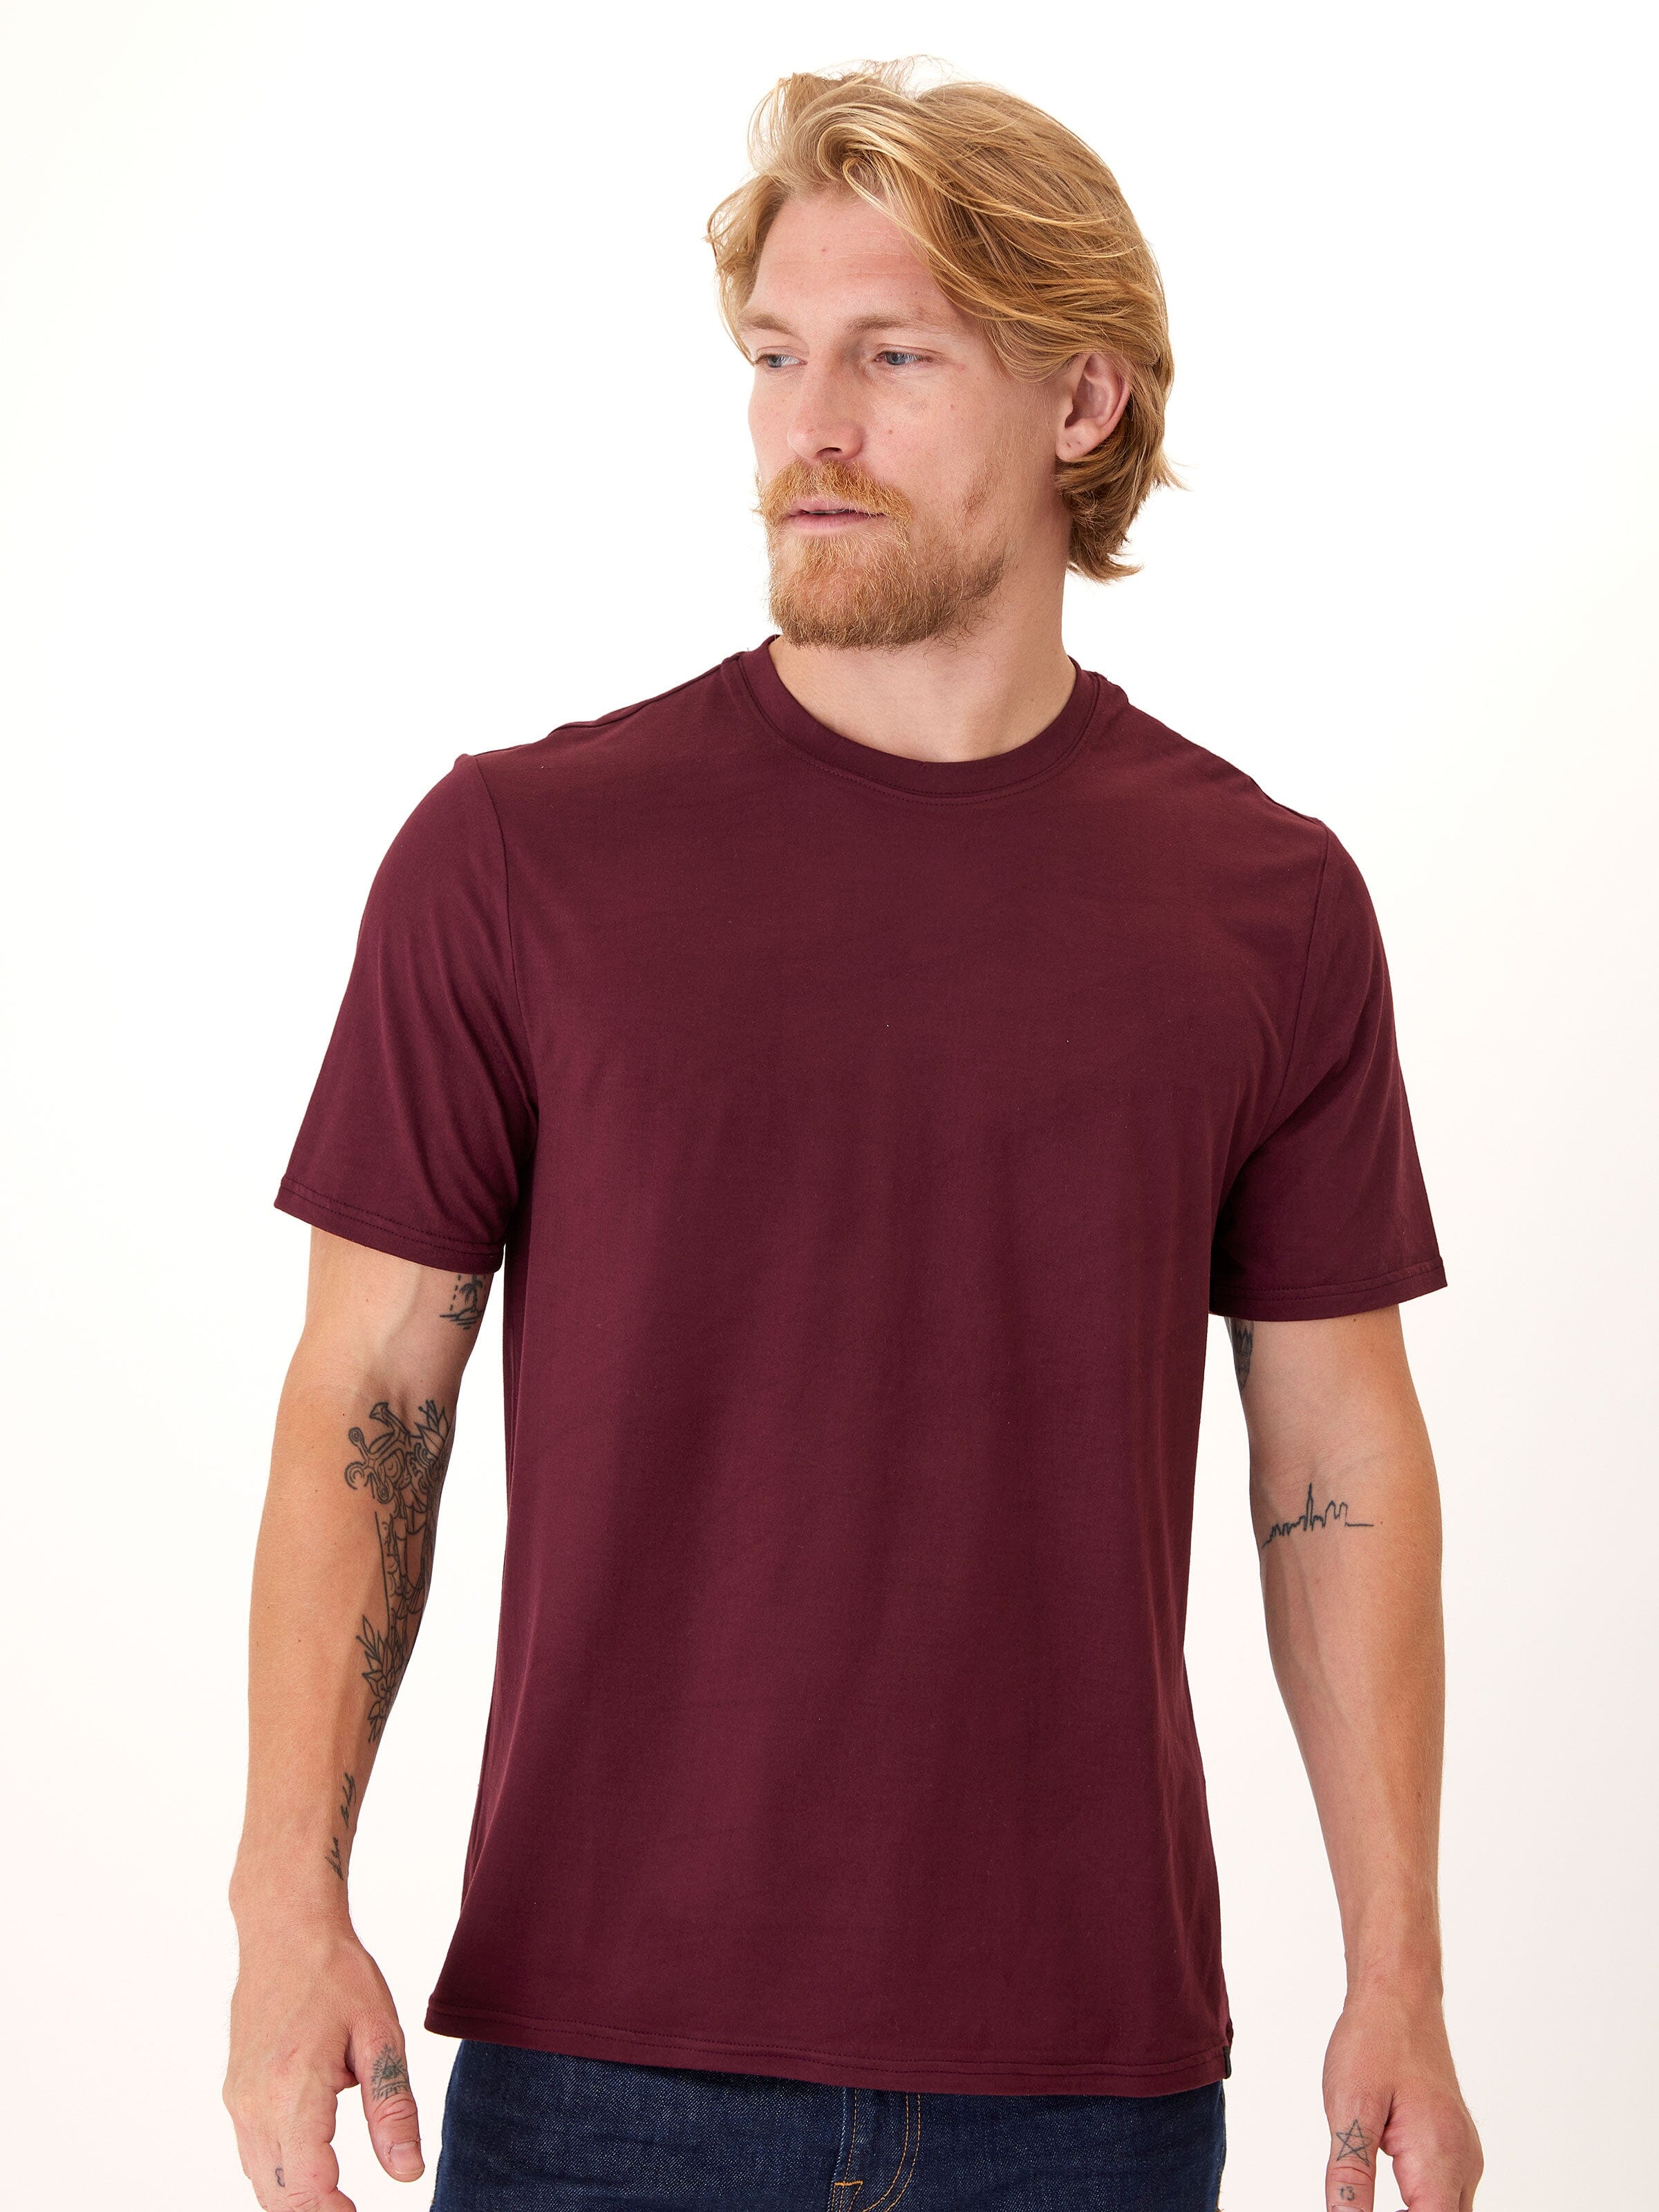 Soloman Luxe Jersey Tee Mens Tops Tshirt Short Threads 4 Thought 